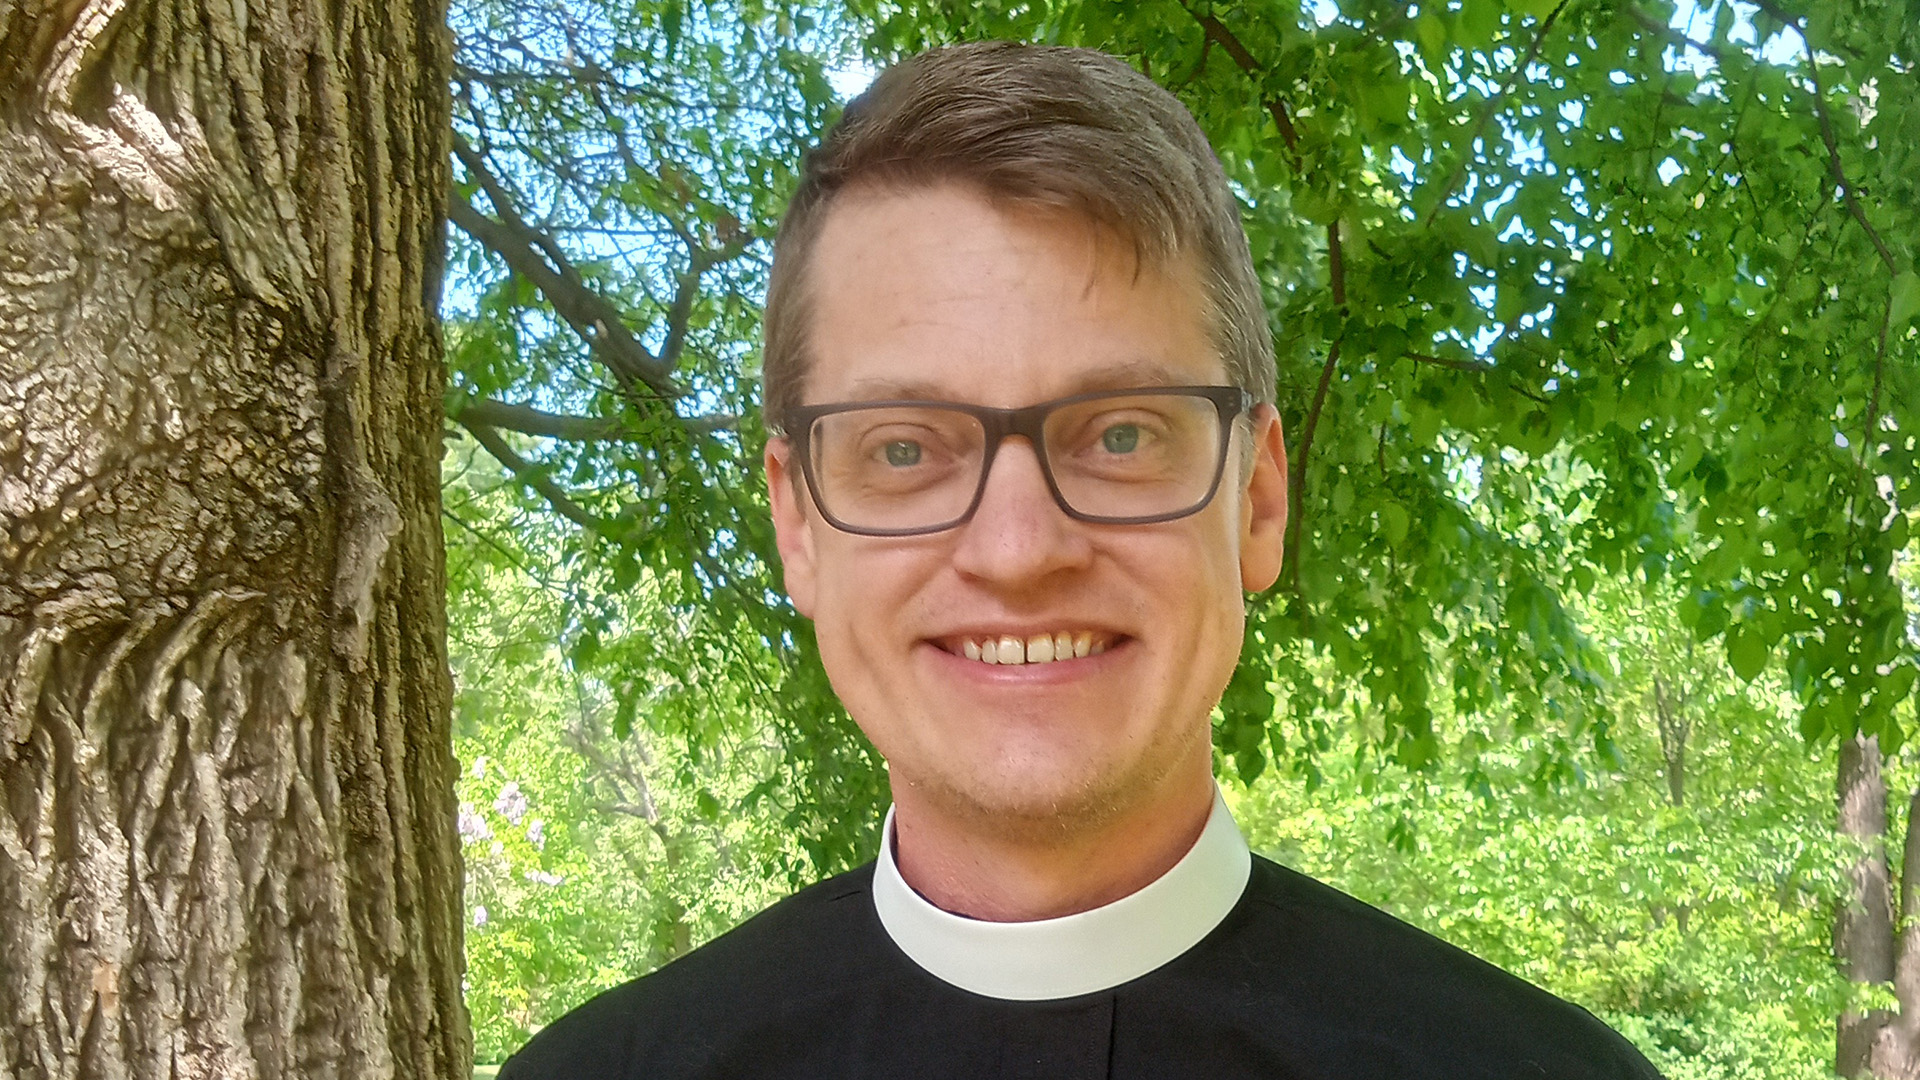 Meet Silas: The New Curate at St. James in Springfield